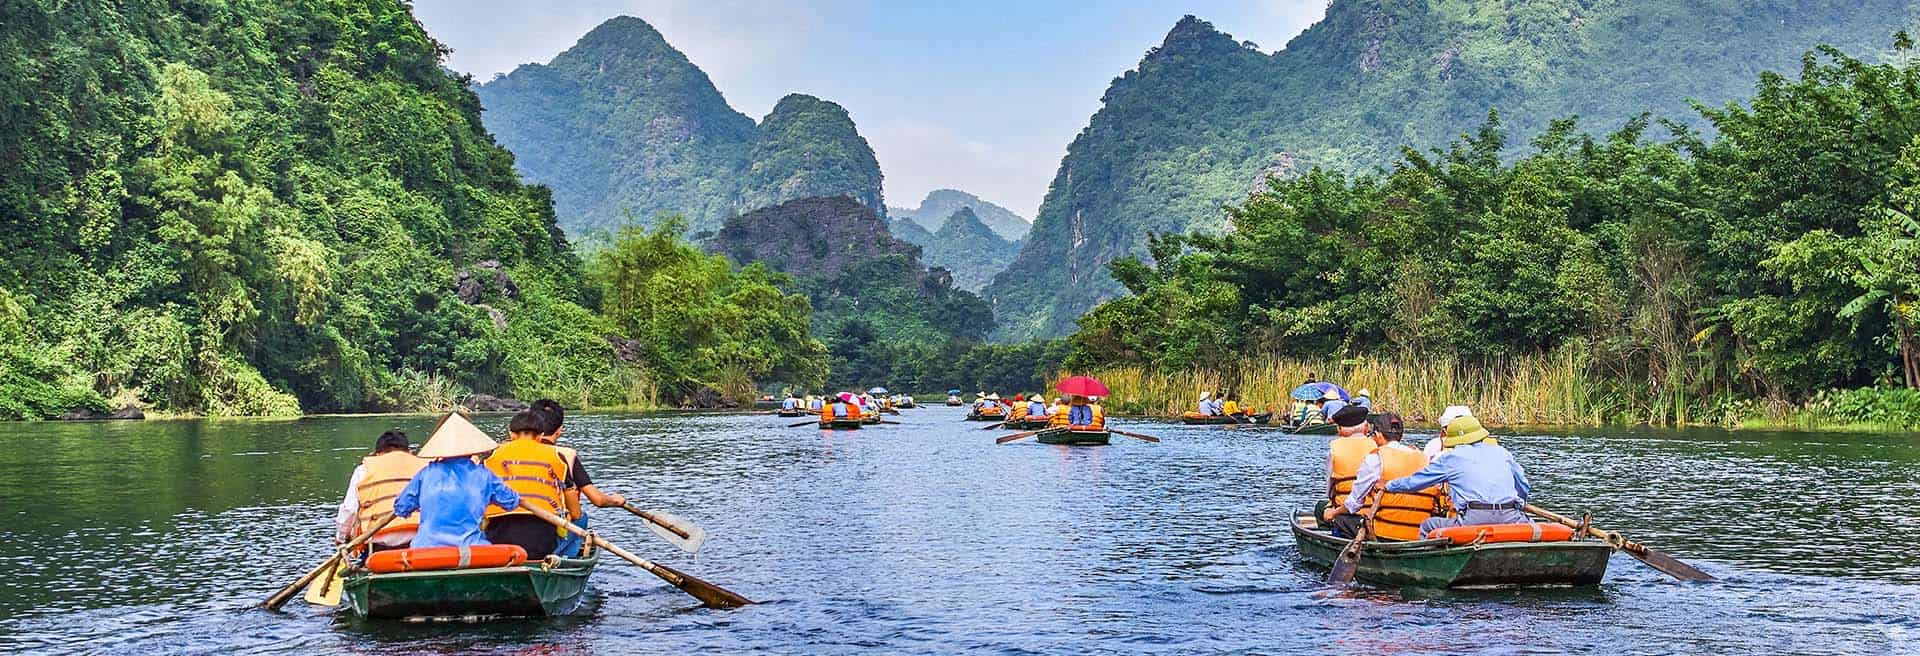 Day Trips from Hanoi Explore the Best of Northern Vietnam